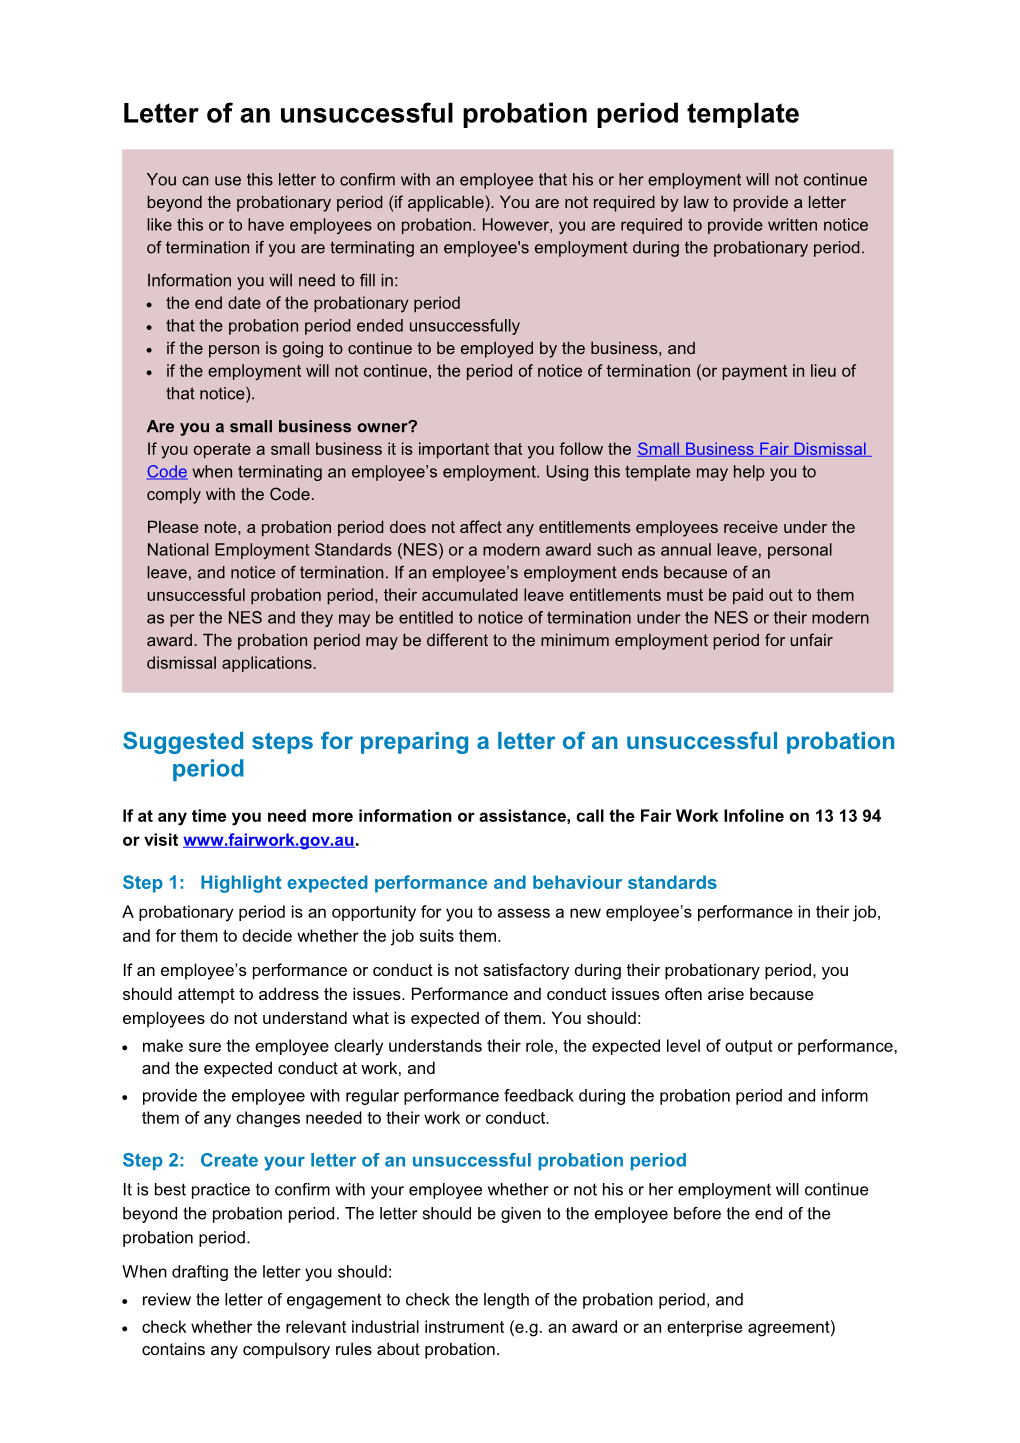 Letter of an Unsuccessful Probation Period Template